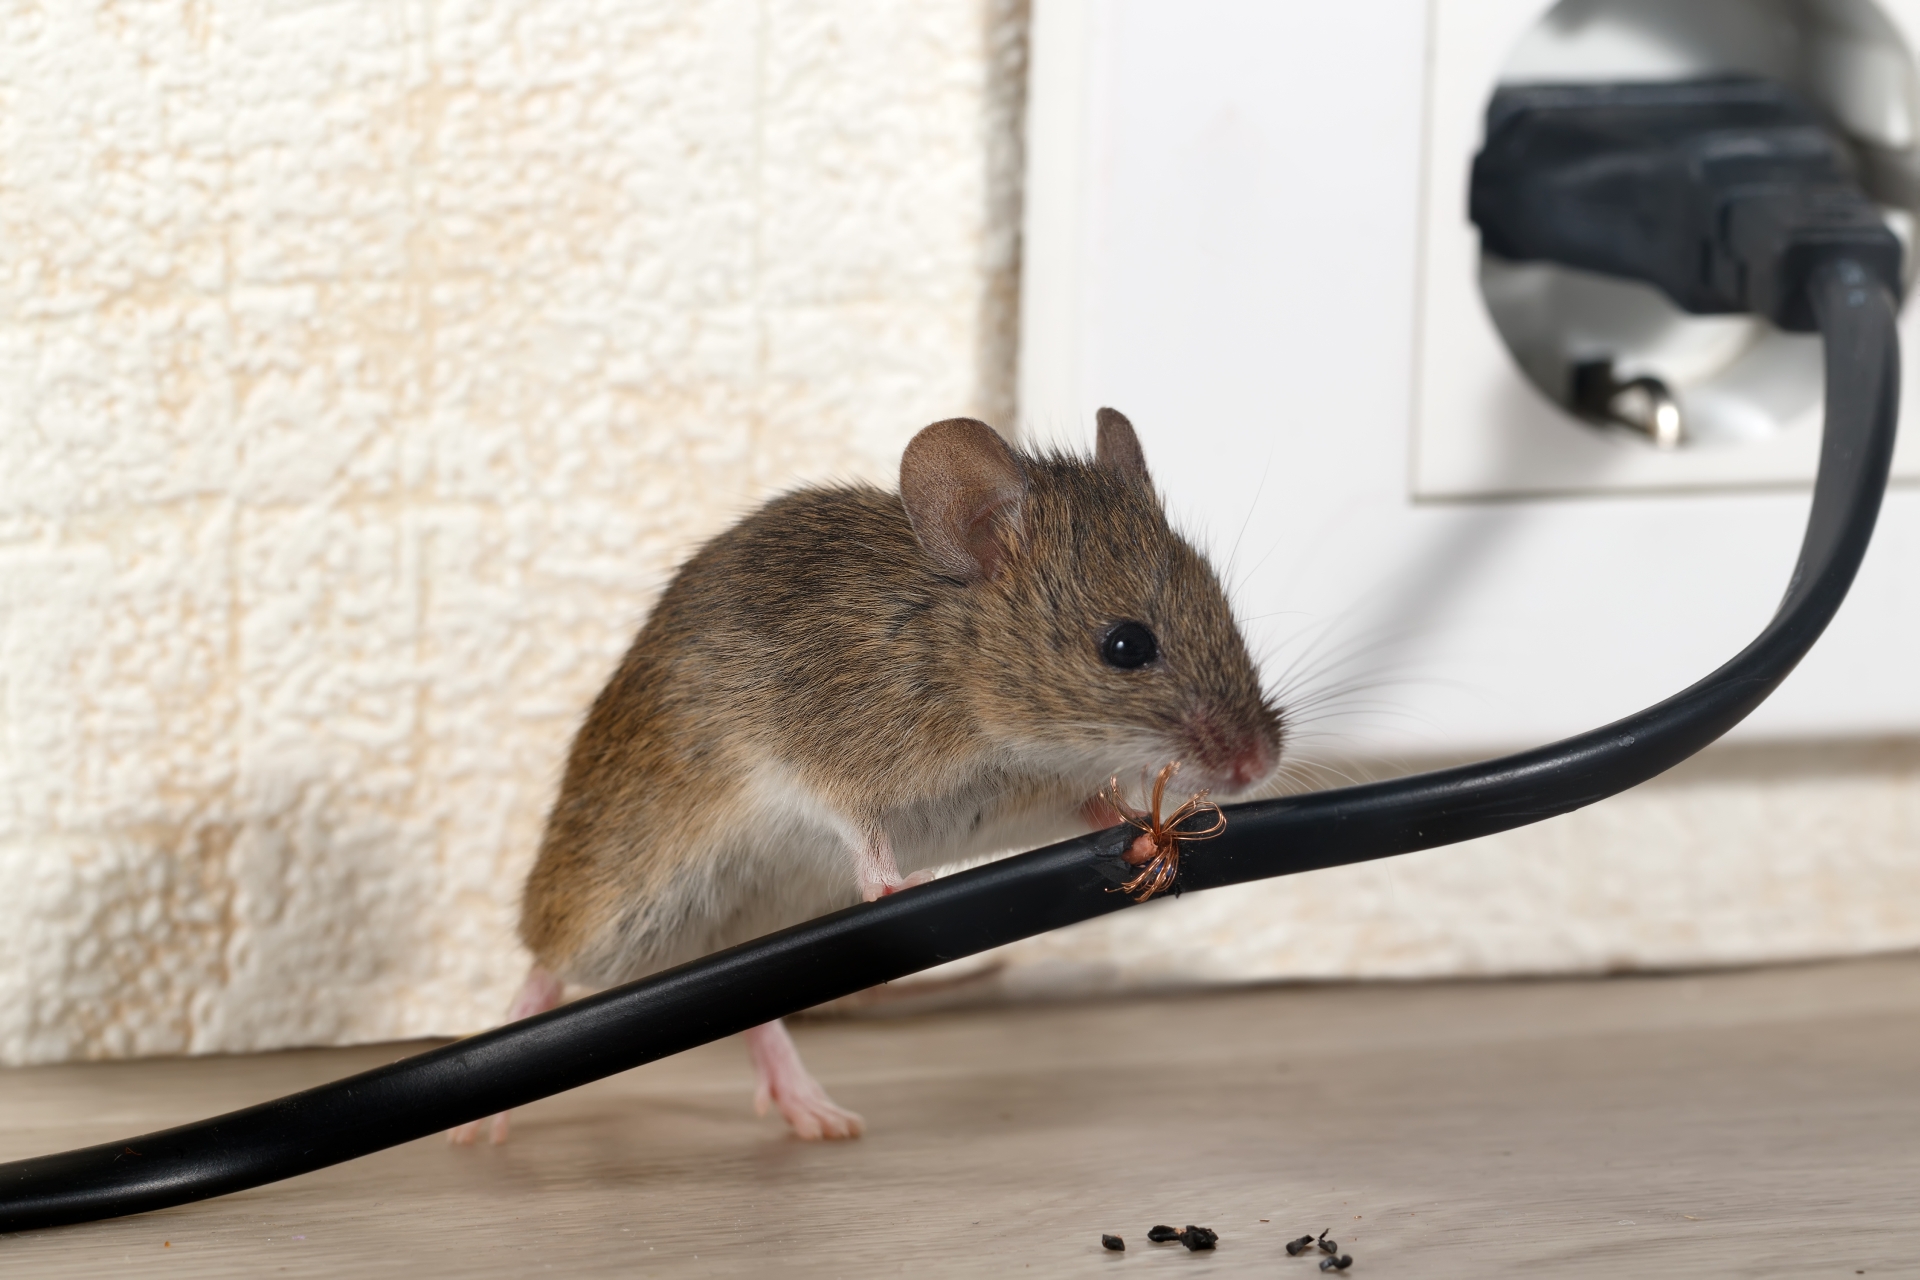 Mice Infestation, Pest Control in Streatham, SW16. Call Now 020 8166 9746